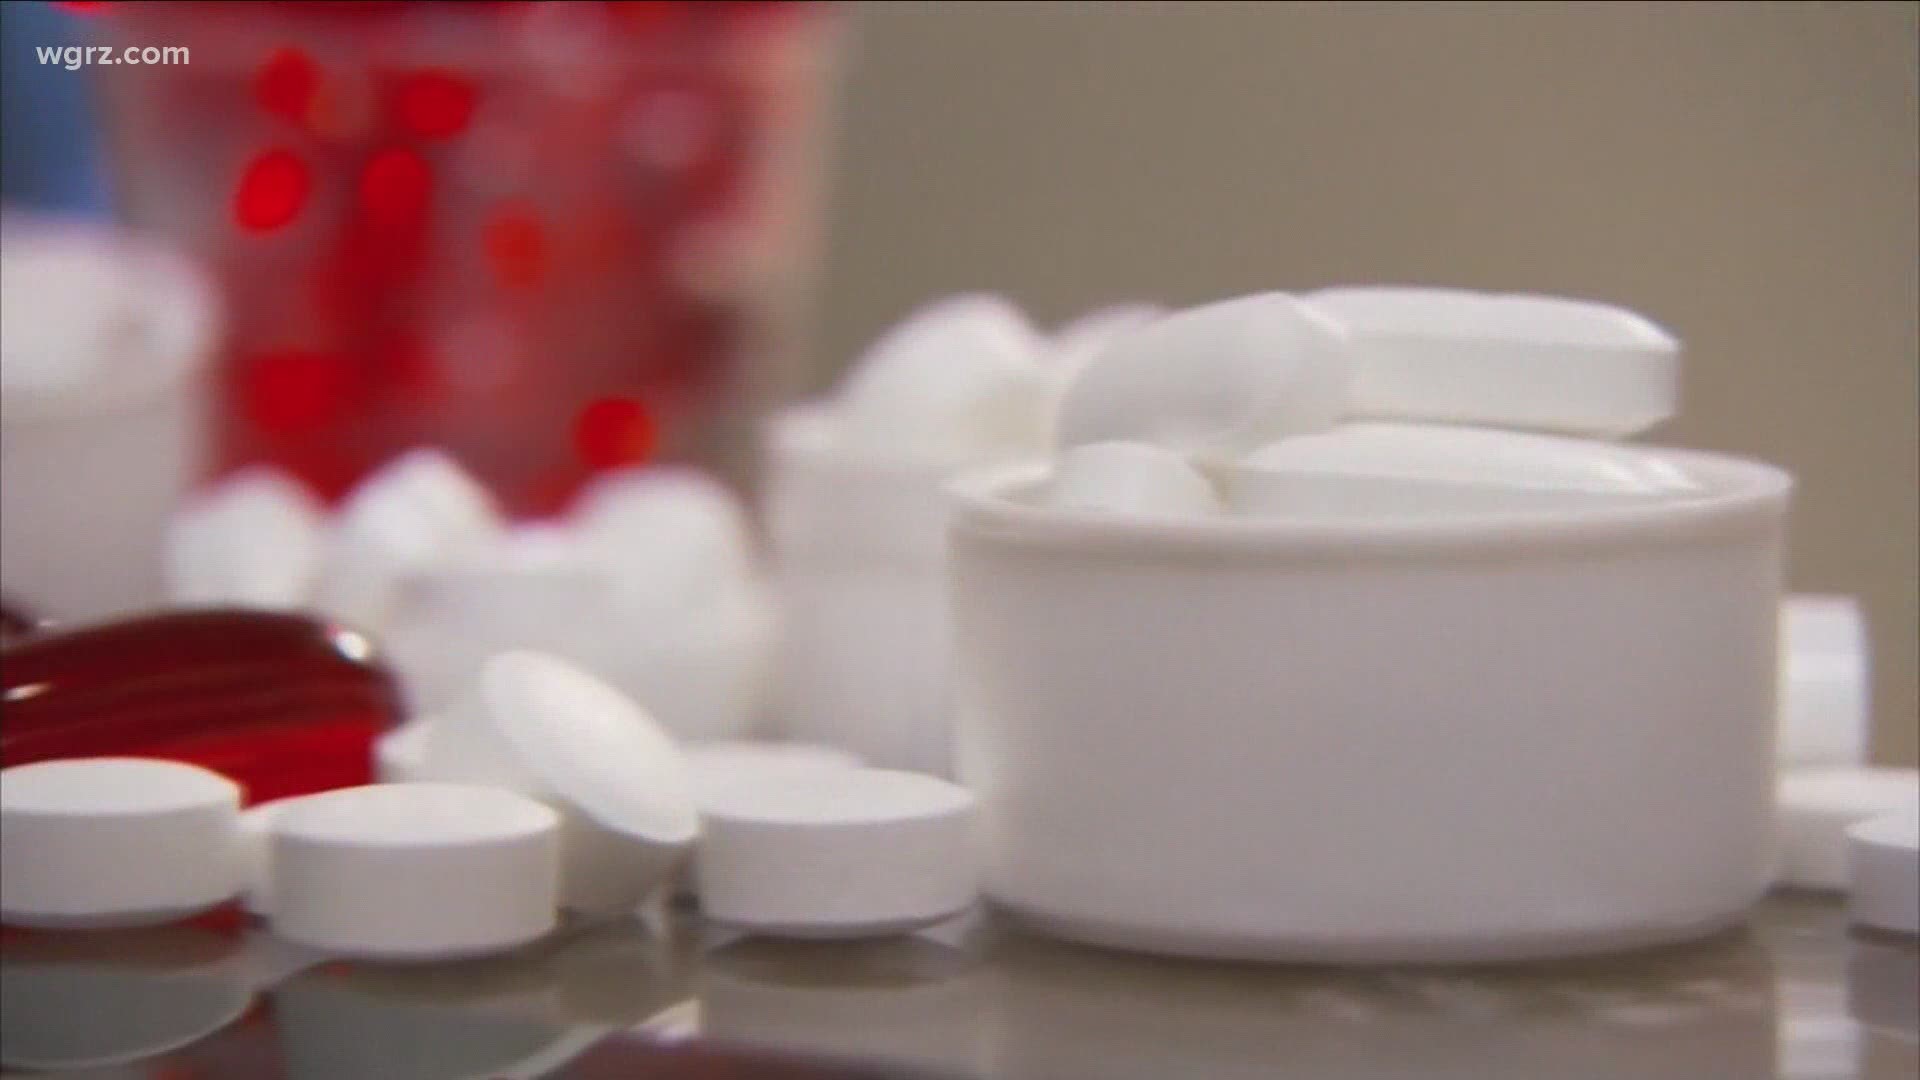 Highest number of overdose deaths in 3 years